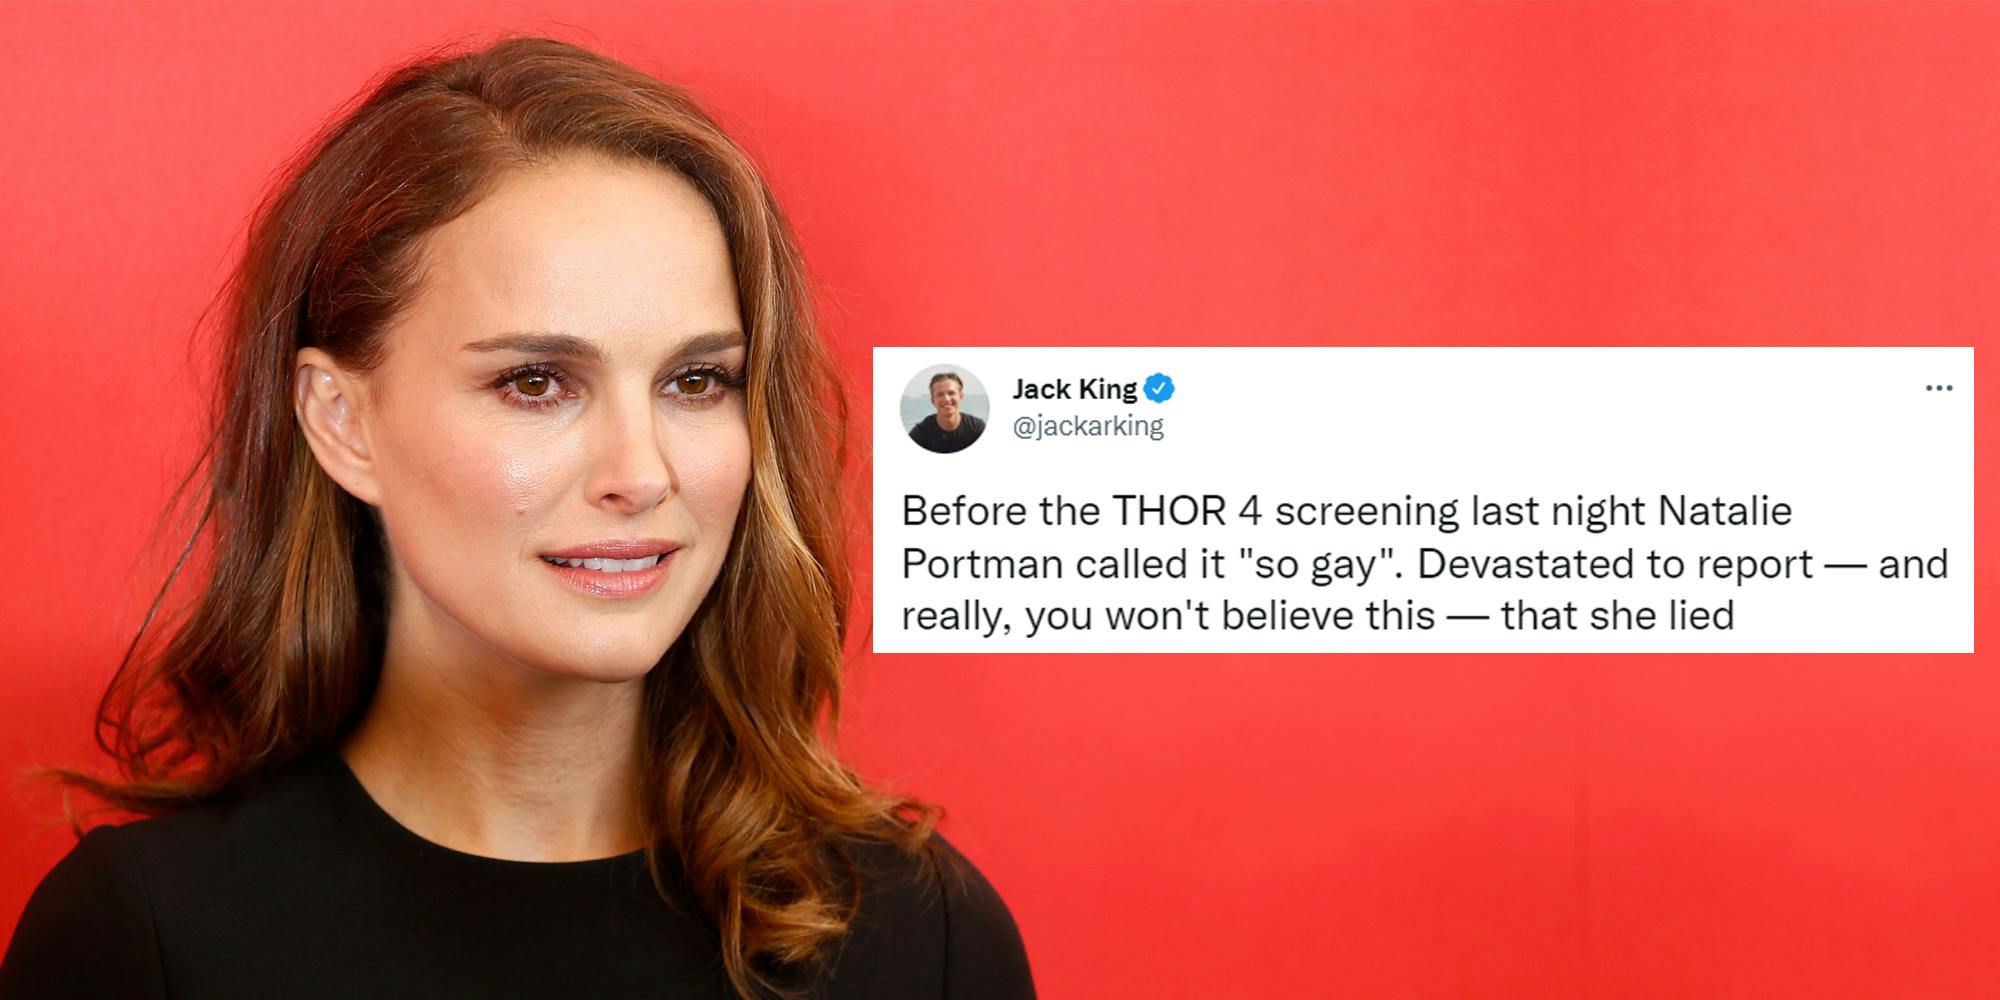 Natalie Portman on red background left side with tweet by Jack King on right caption "Before THOR 4 screening last night Natalie portman called it "so gay". Devastated to report- and really, you won't believe this- that she lied"